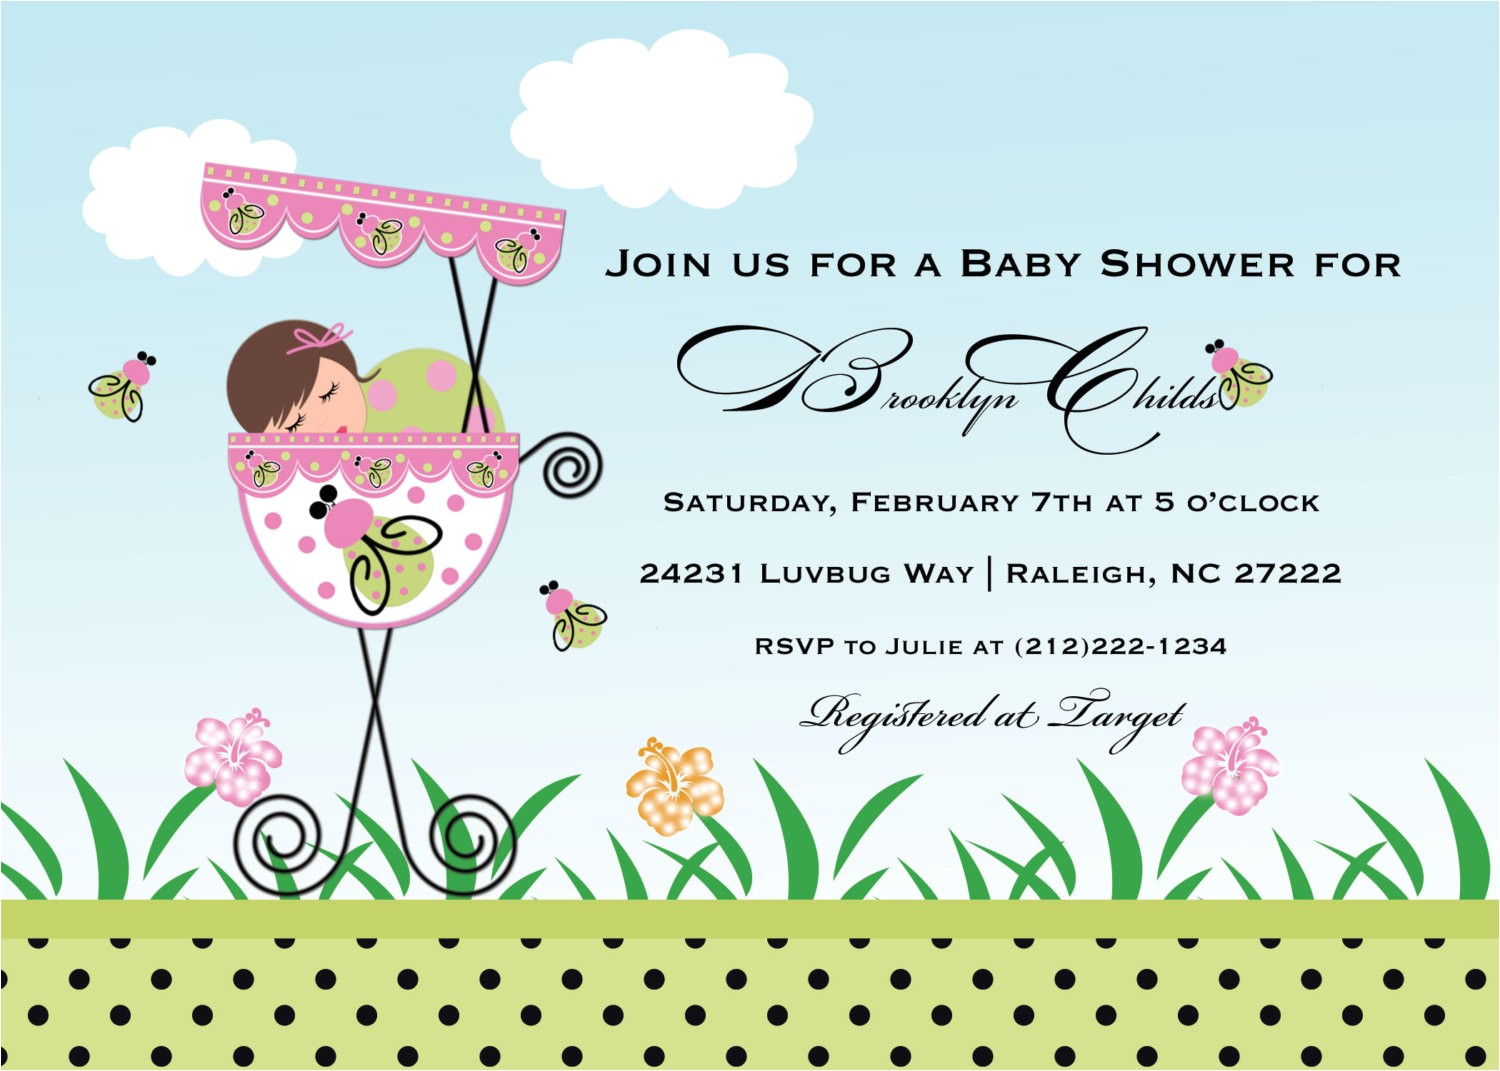 Greetings for Baby Shower Invitations Baby Shower Invitations Cards